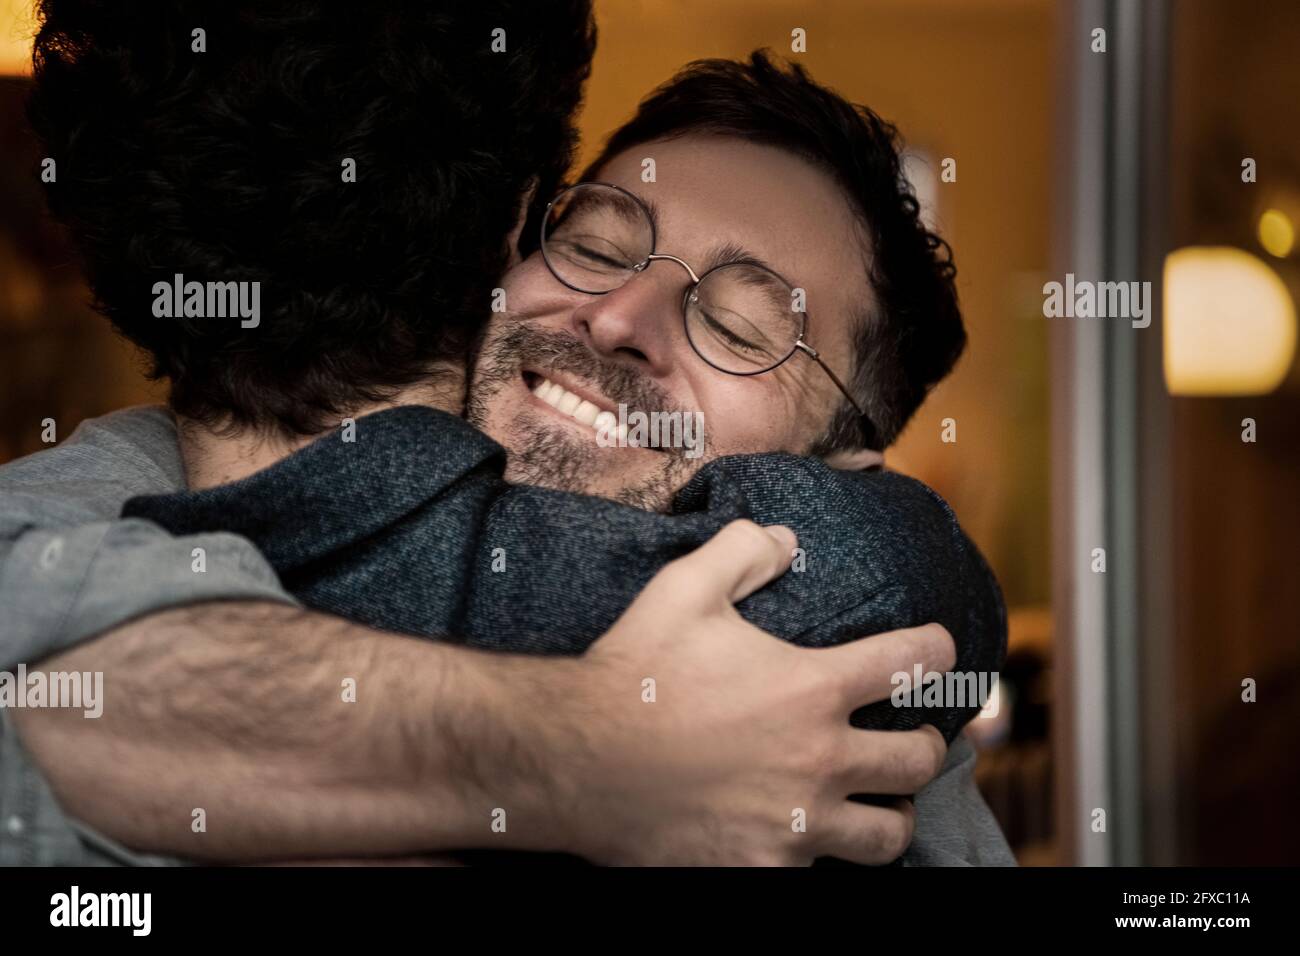 Smiling mature man embracing male friend at home Stock Photo